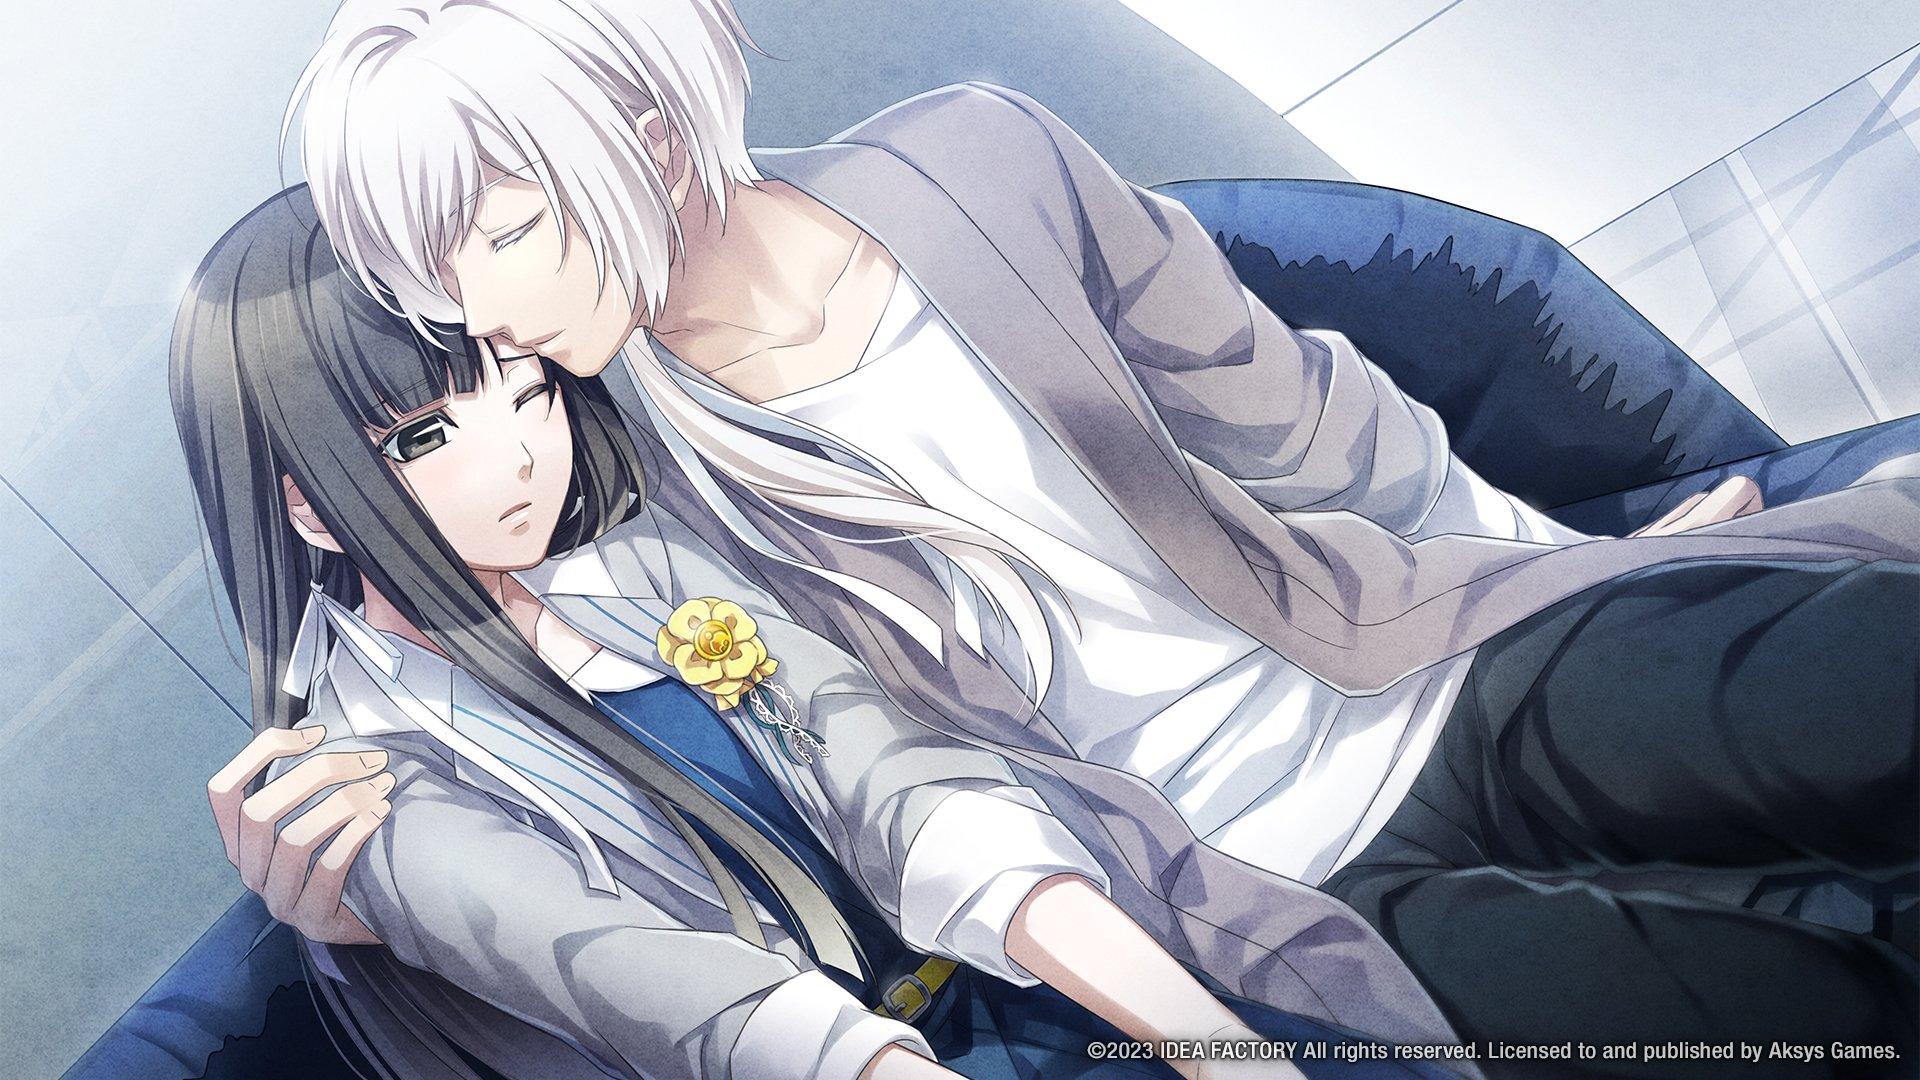 Norn9: What If the Future is the Past? – Mechanical Anime Reviews